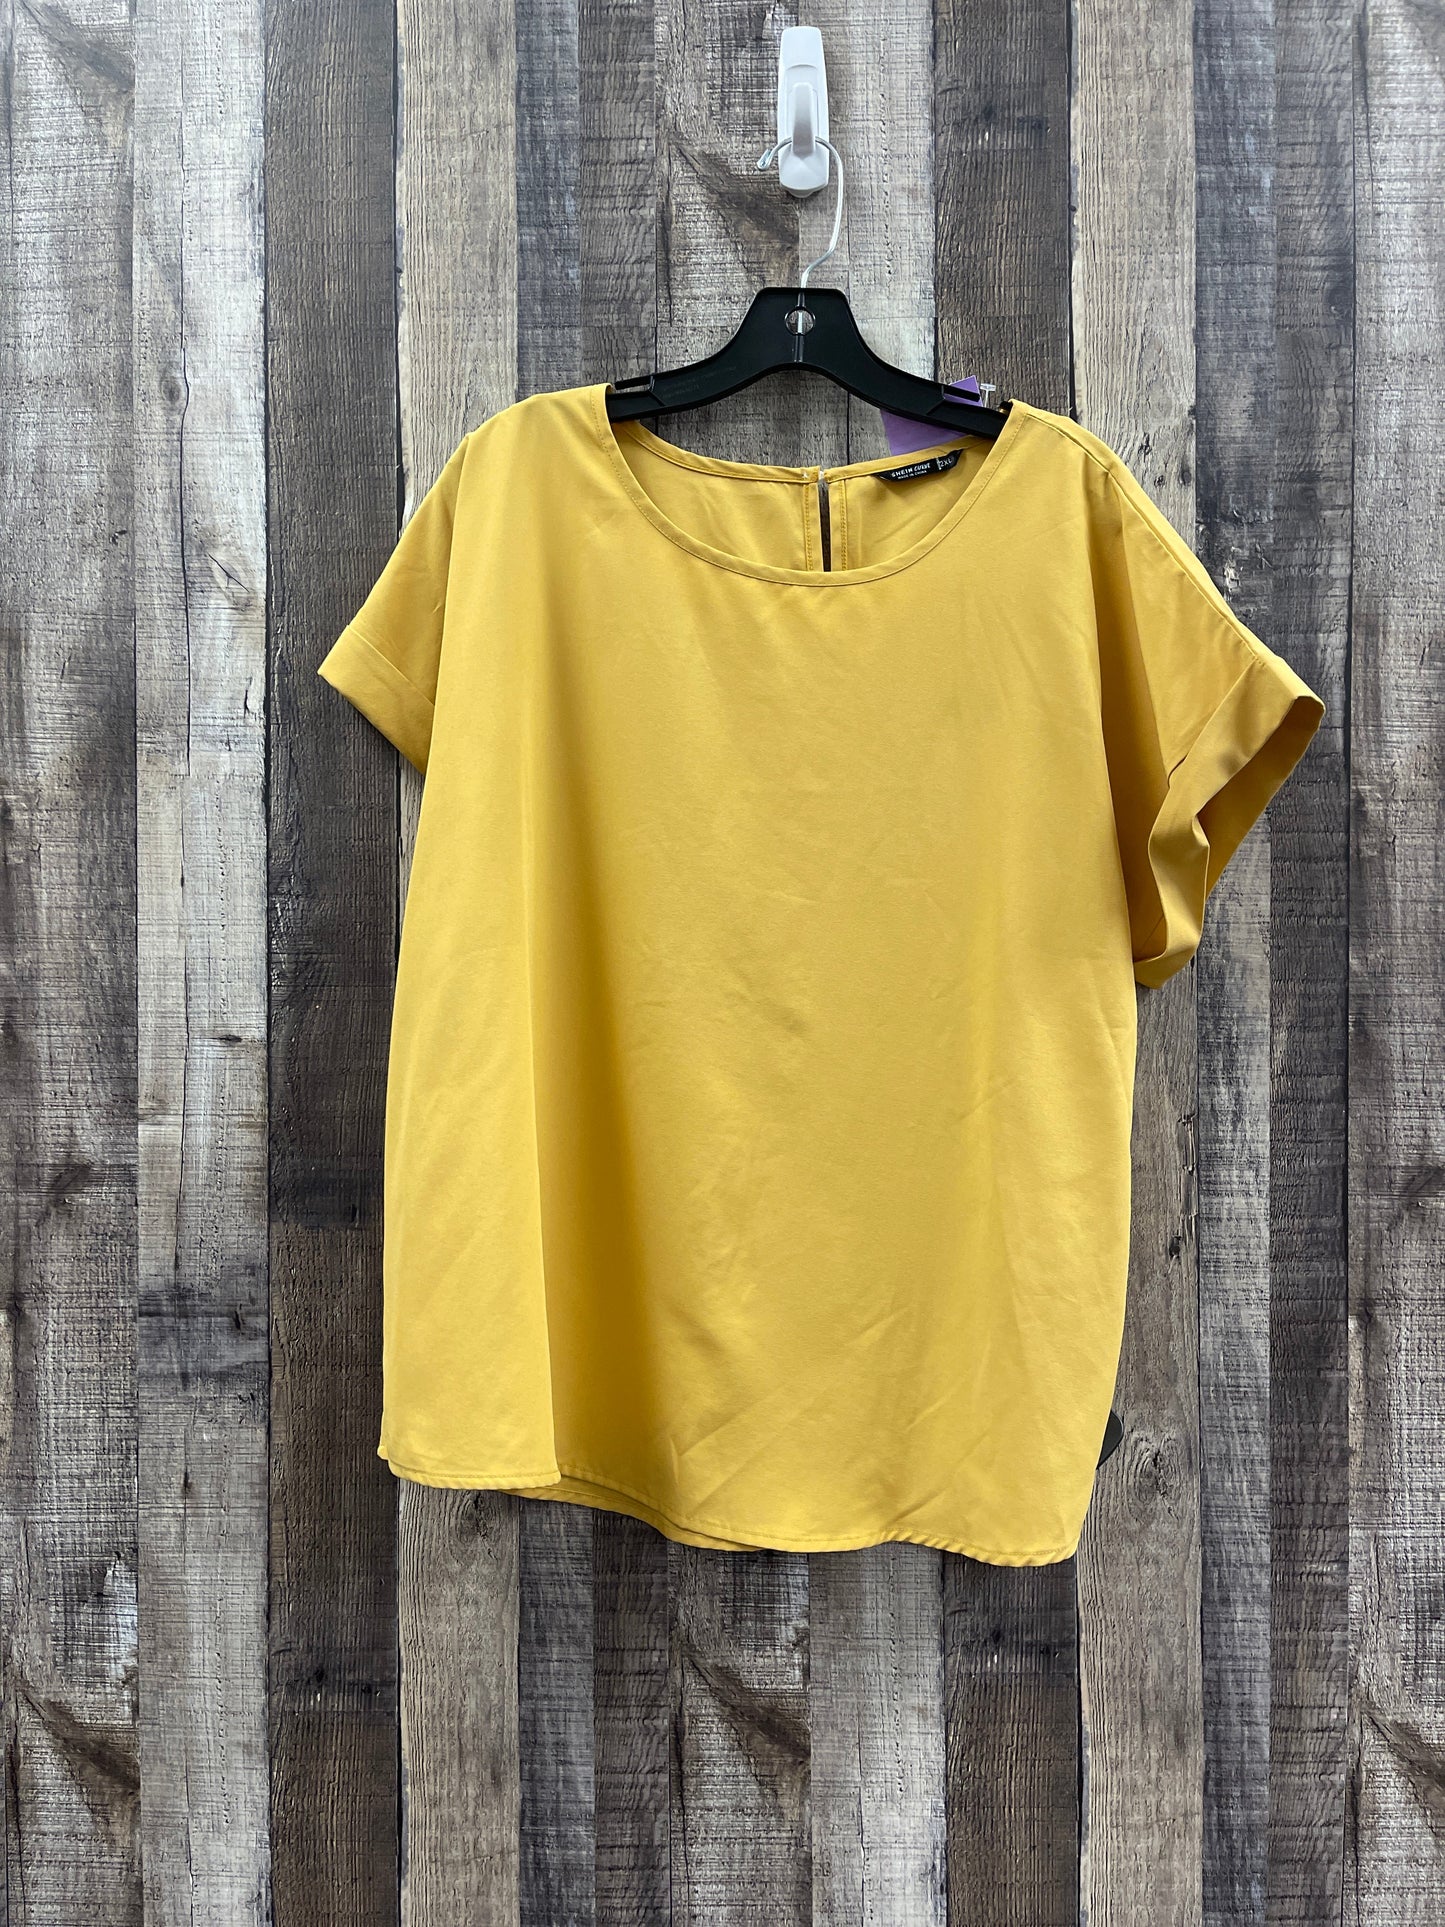 Yellow Blouse Short Sleeve Shein, Size 2x